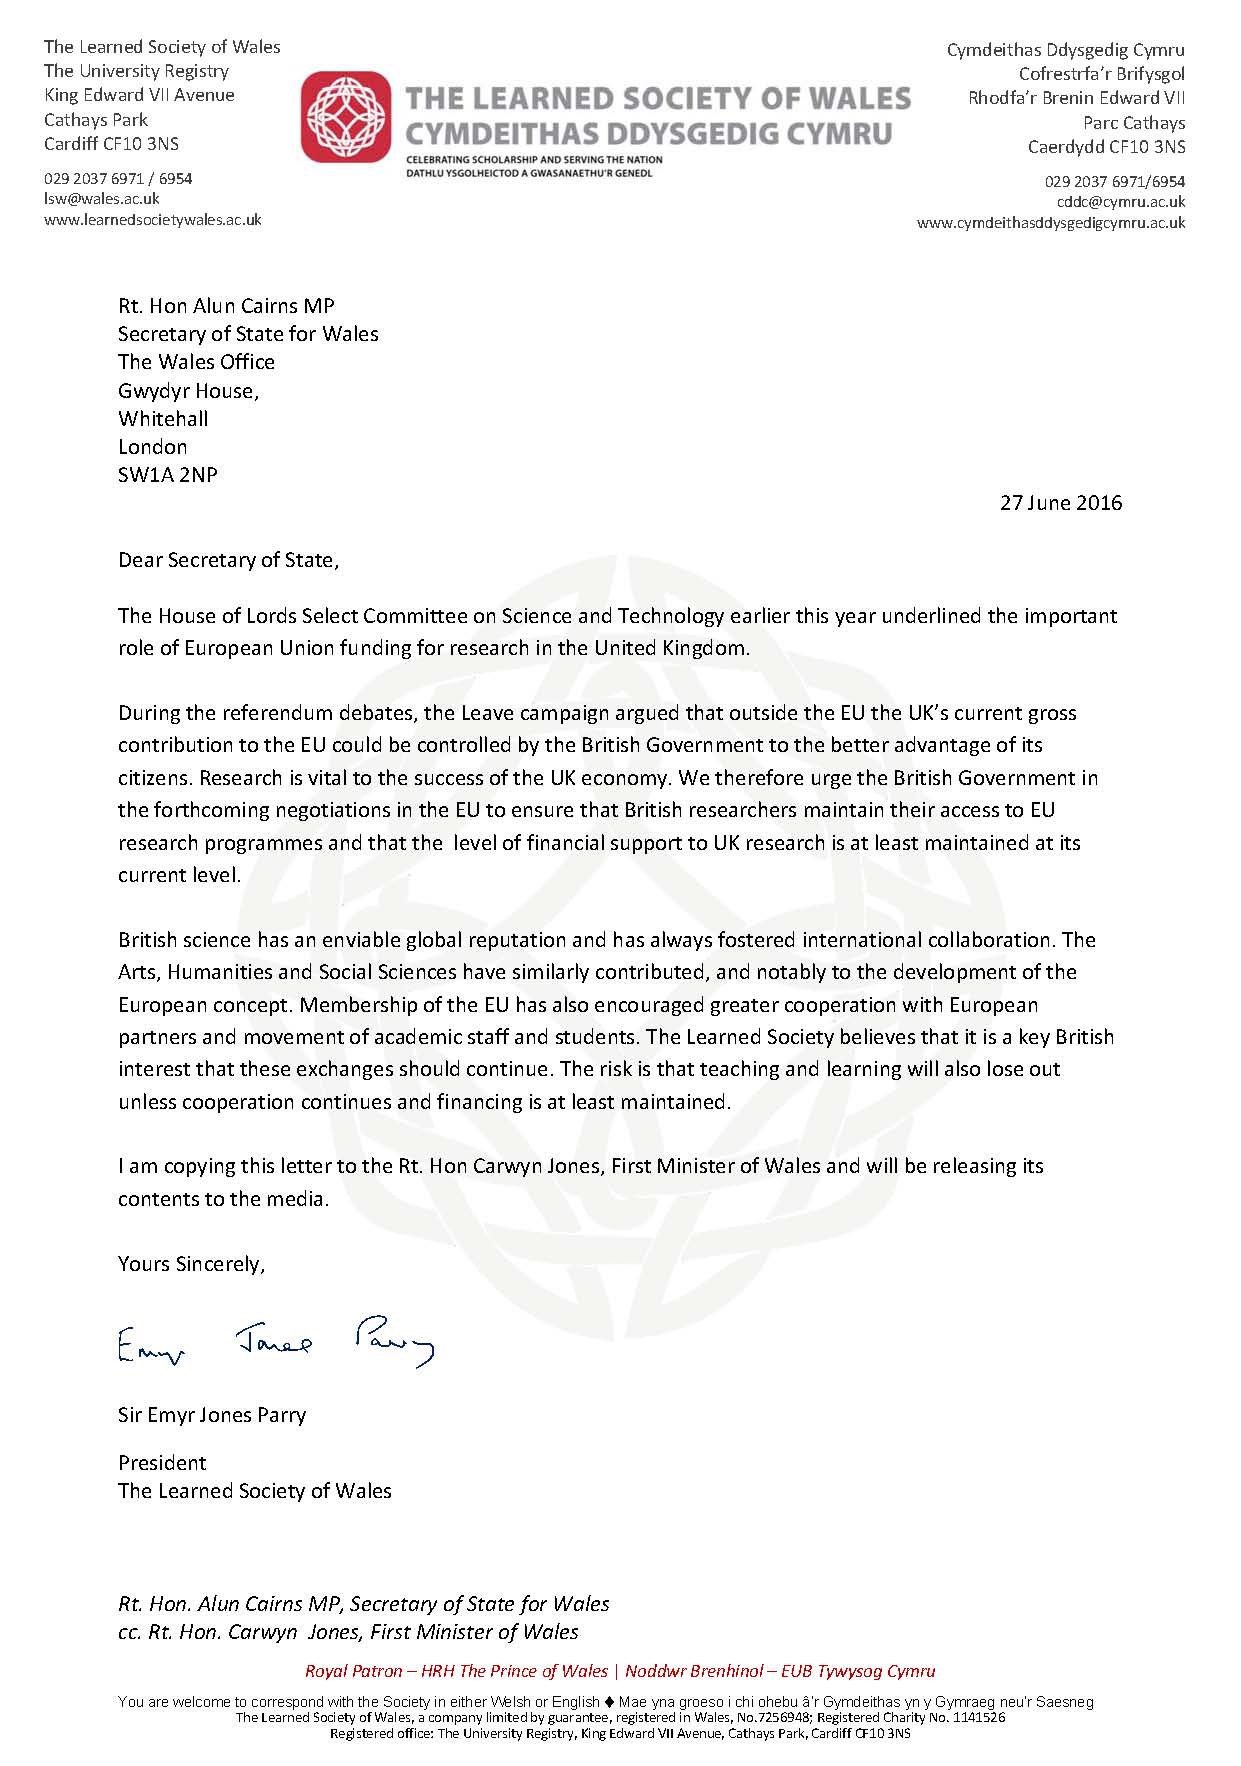 President's letter to Secretary of State for Wales | The ...